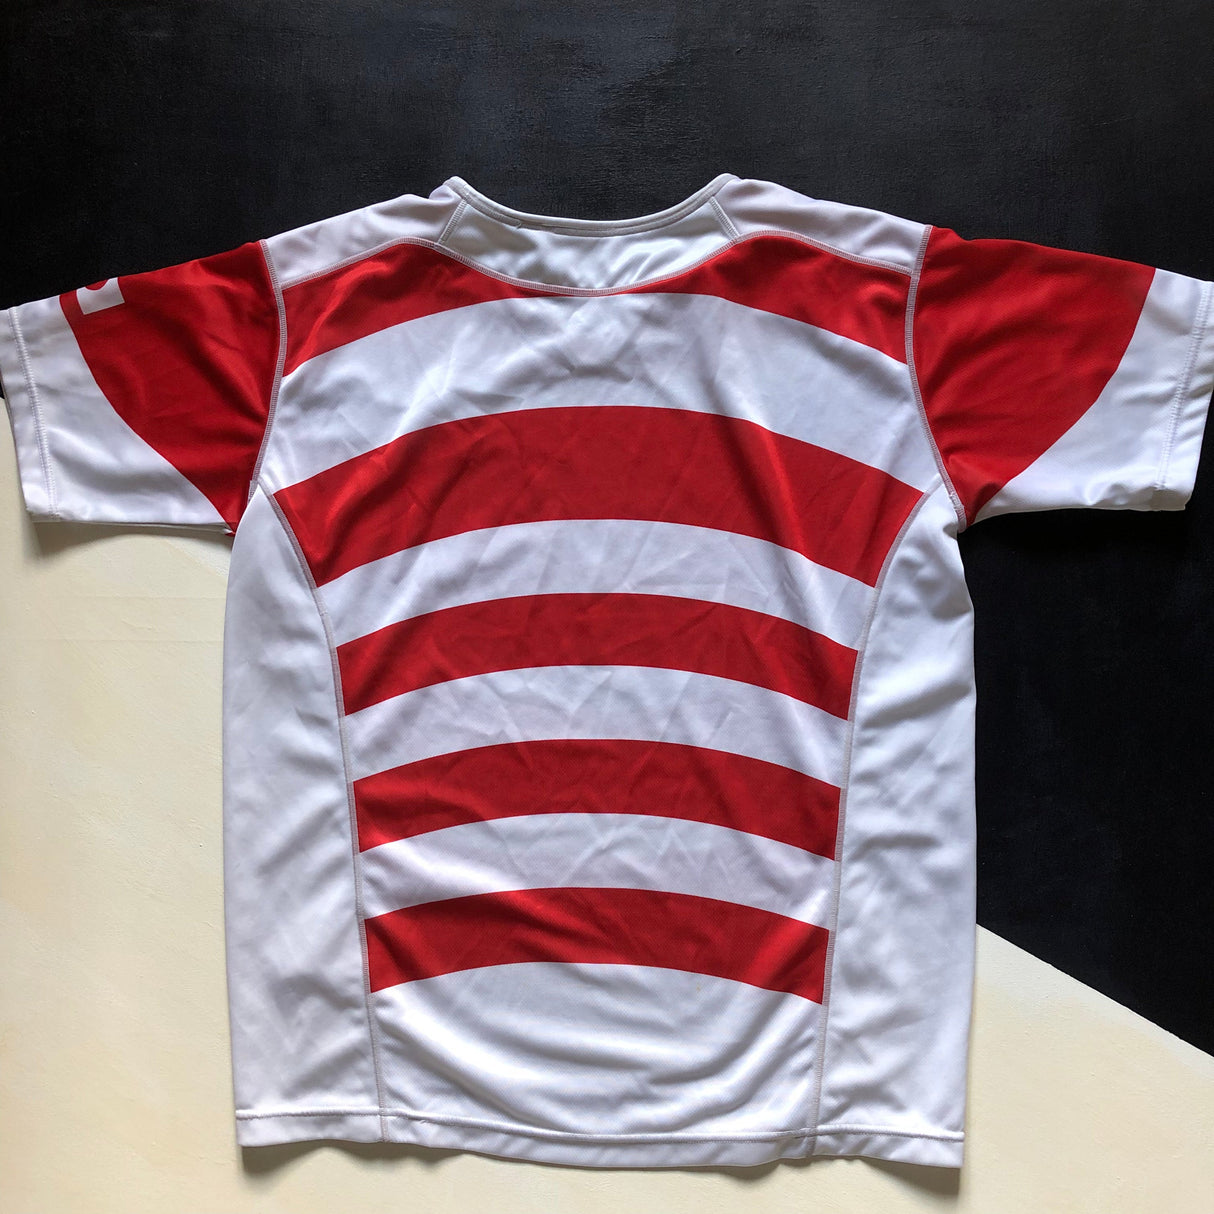 Japan National Rugby Team Jersey 2015 Rugby World Cup Large Underdog Rugby - The Tier 2 Rugby Shop 